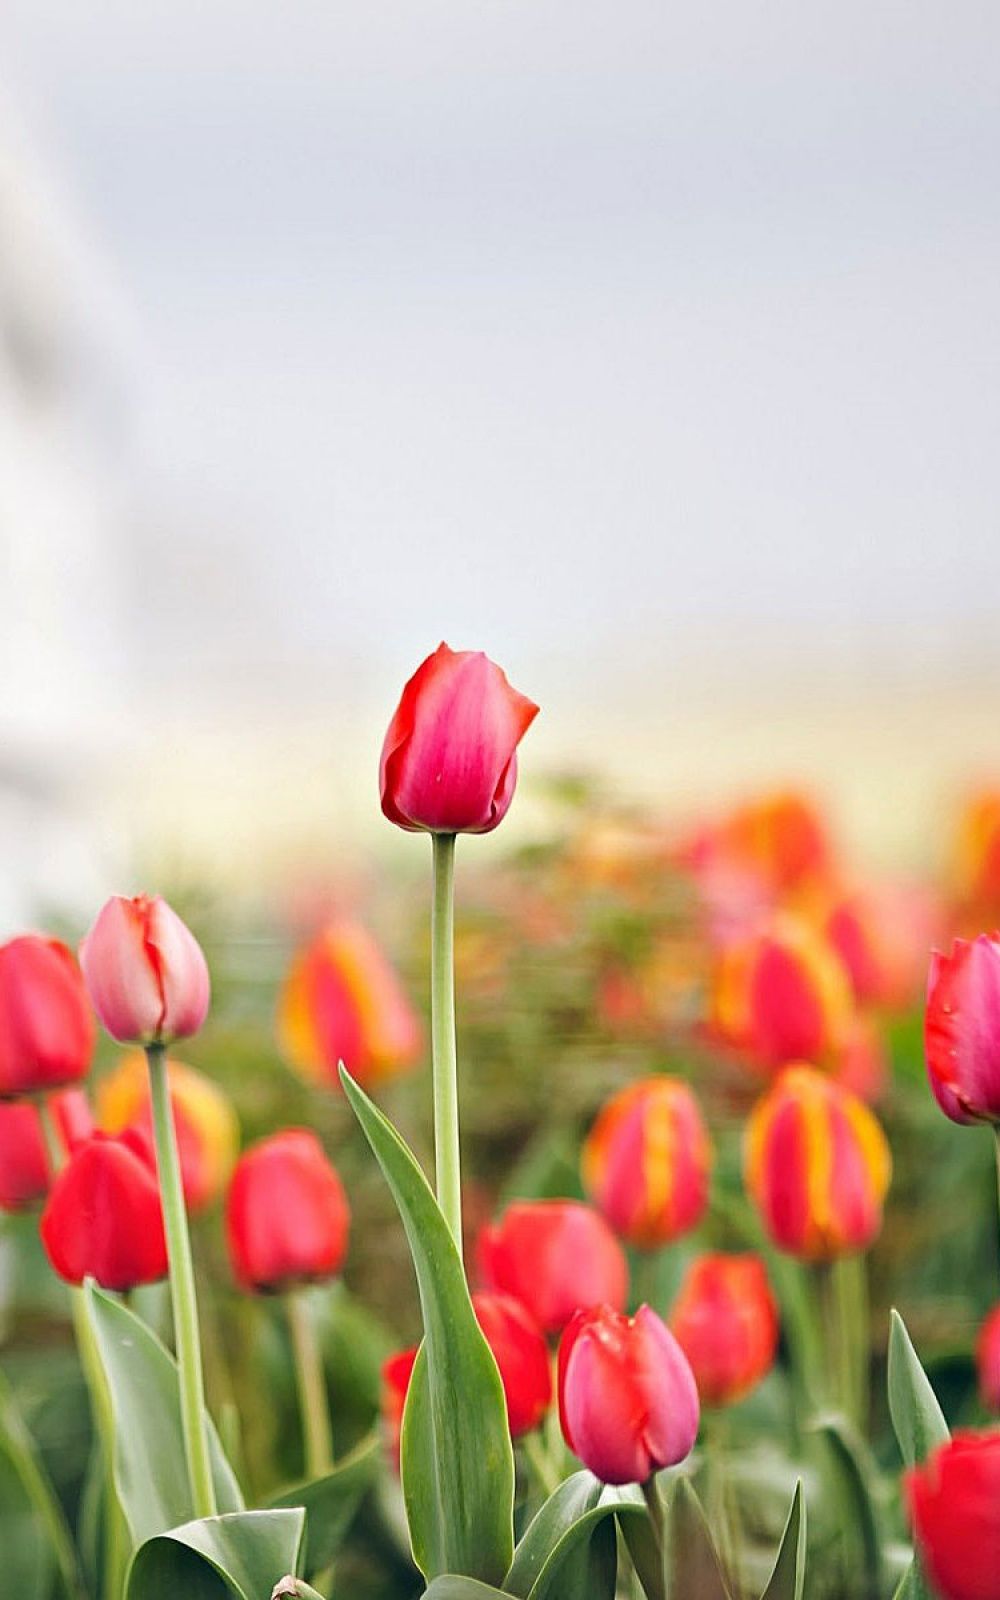 Fence Tulips Flowers Mobile Wallpaper